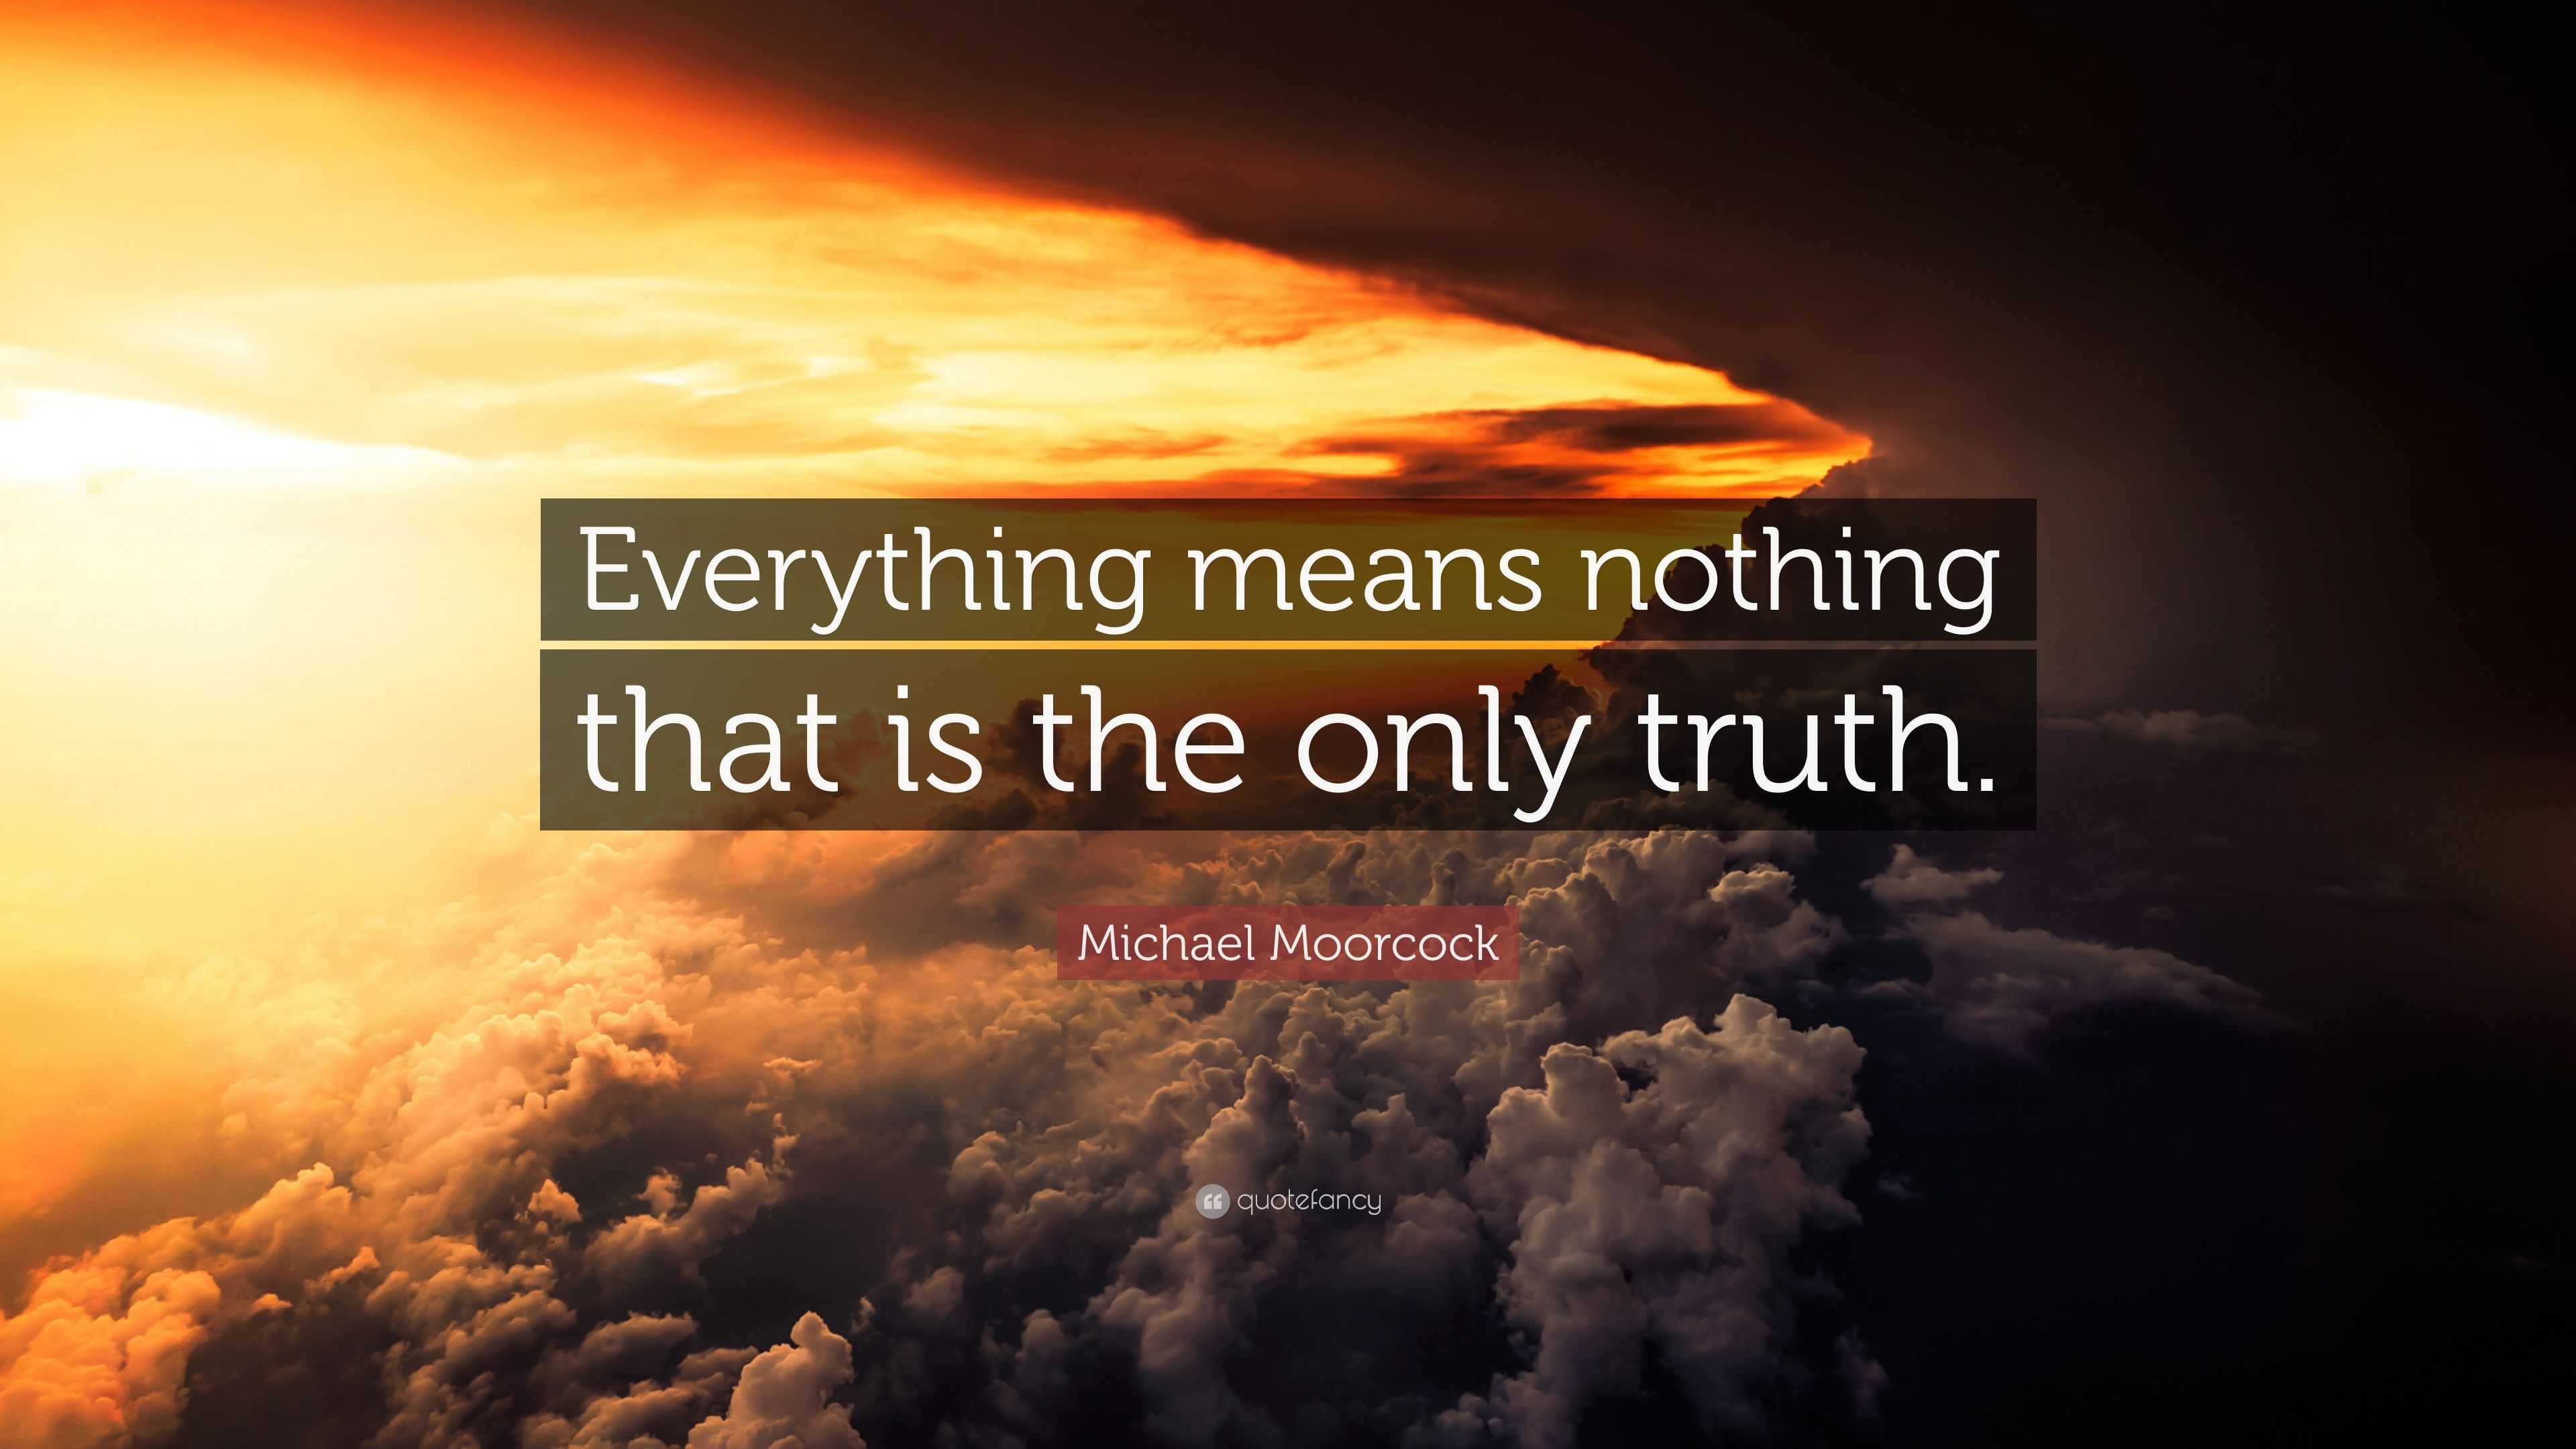 Michael Moorcock Quote “everything Means Nothing That Is The Only Truth ”